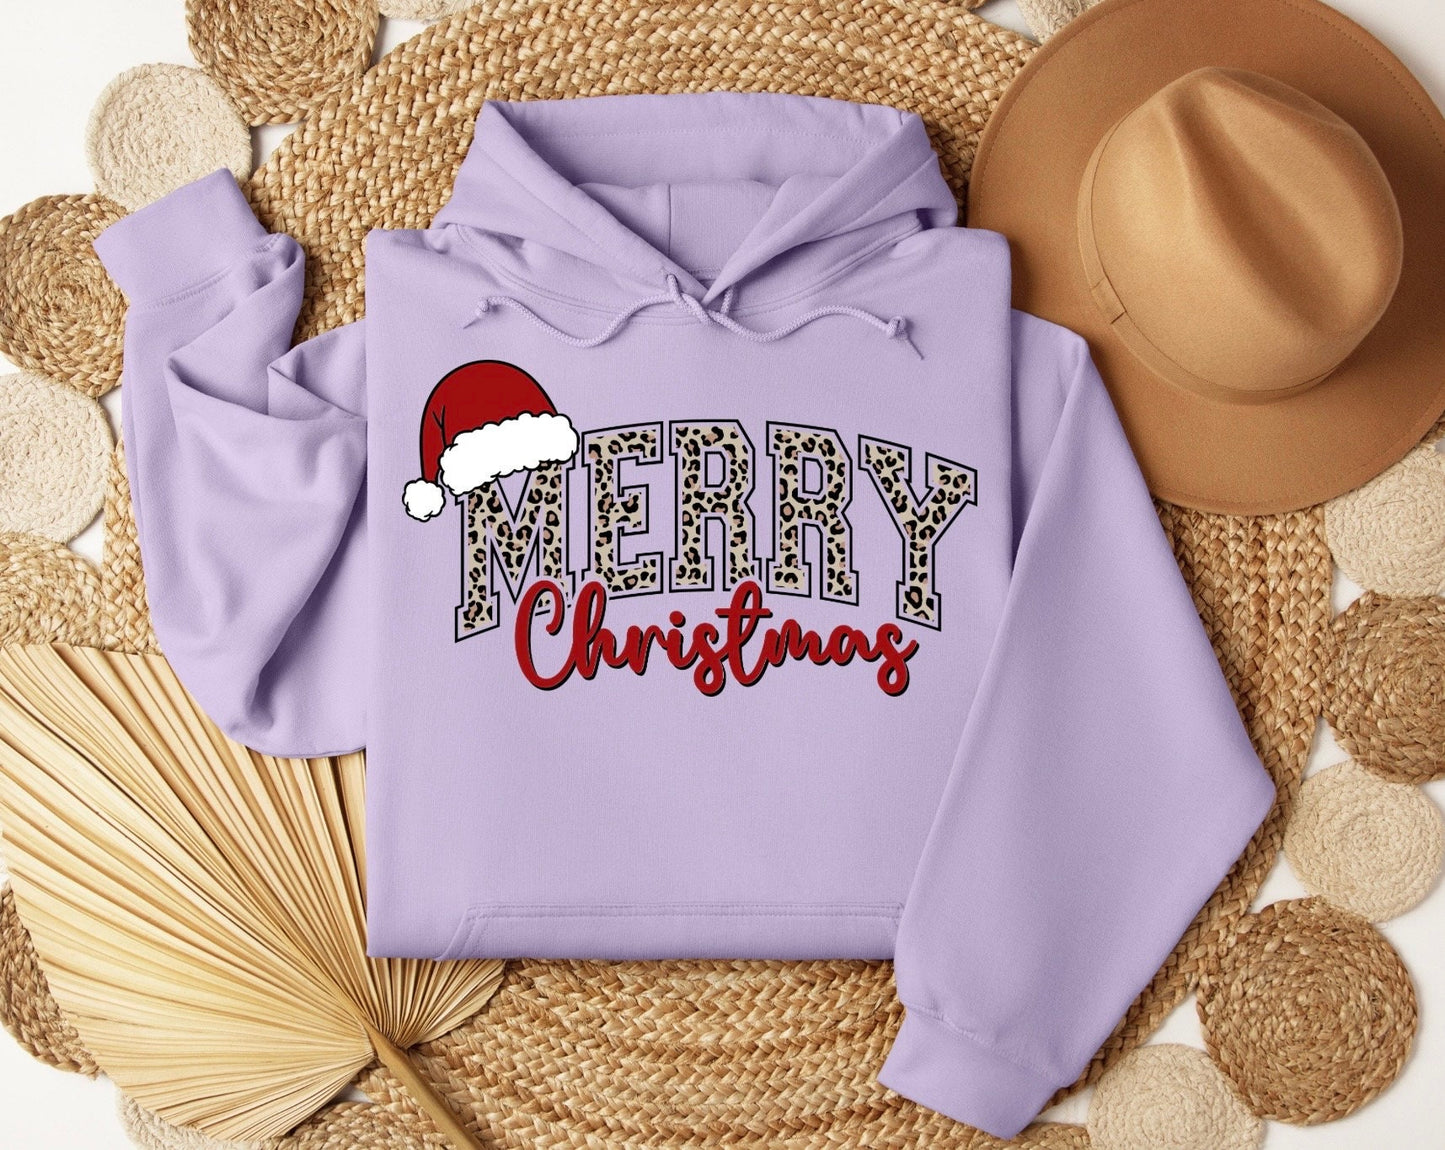 Merry Christmas sweater, Santa baby, Cute Christmas Sweatshirt, Christmas Shirt, Holiday Xmas Tee, Snowman Sweater, womans sweater, Farm Fre